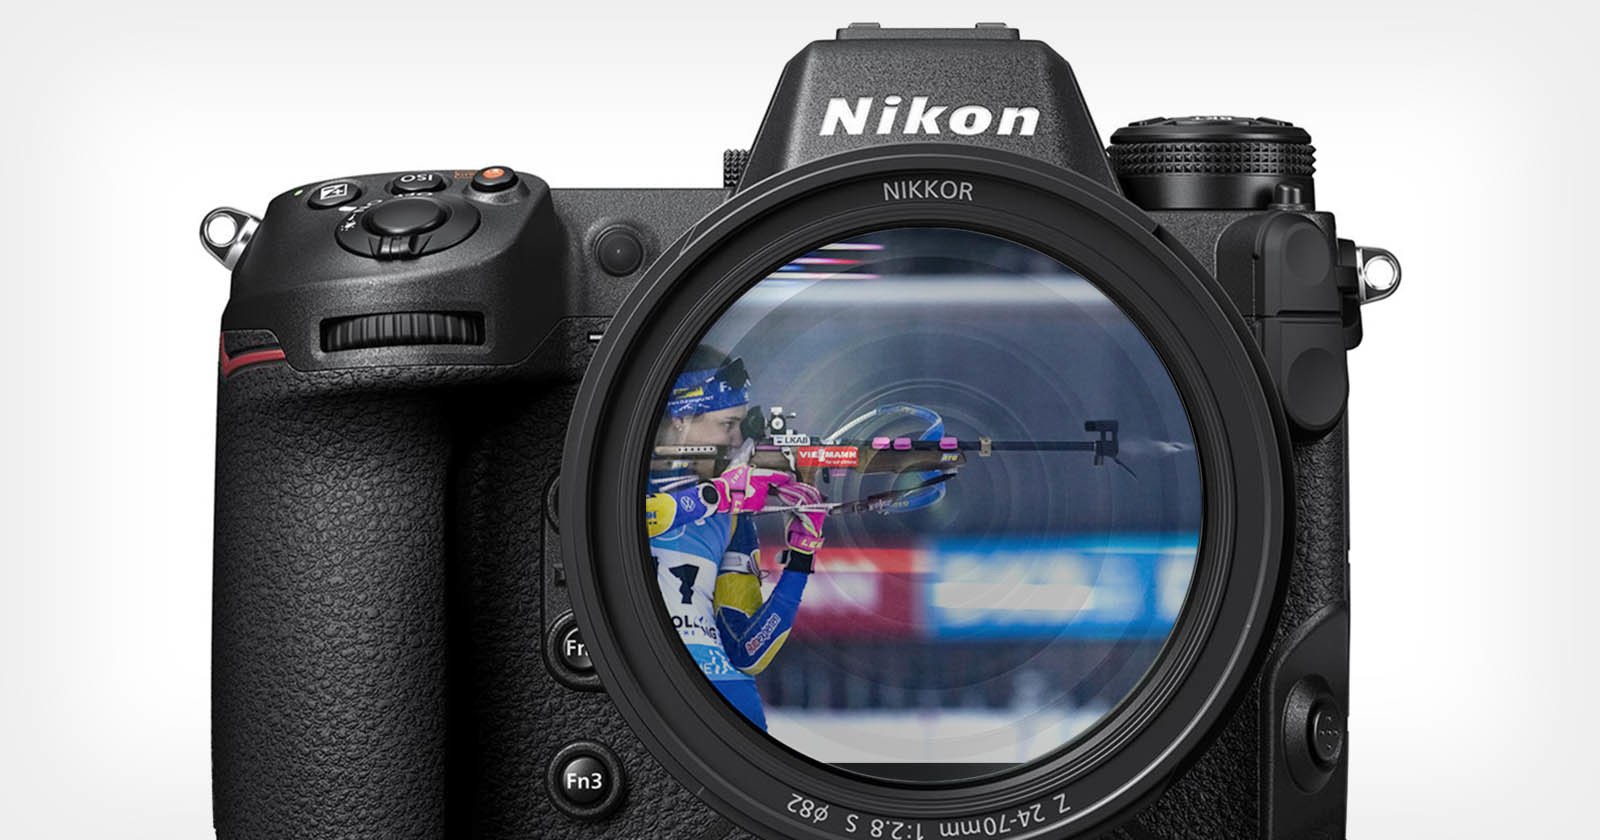 The Nikon Z9 is So Fast It Can Capture a Speeding Bullet